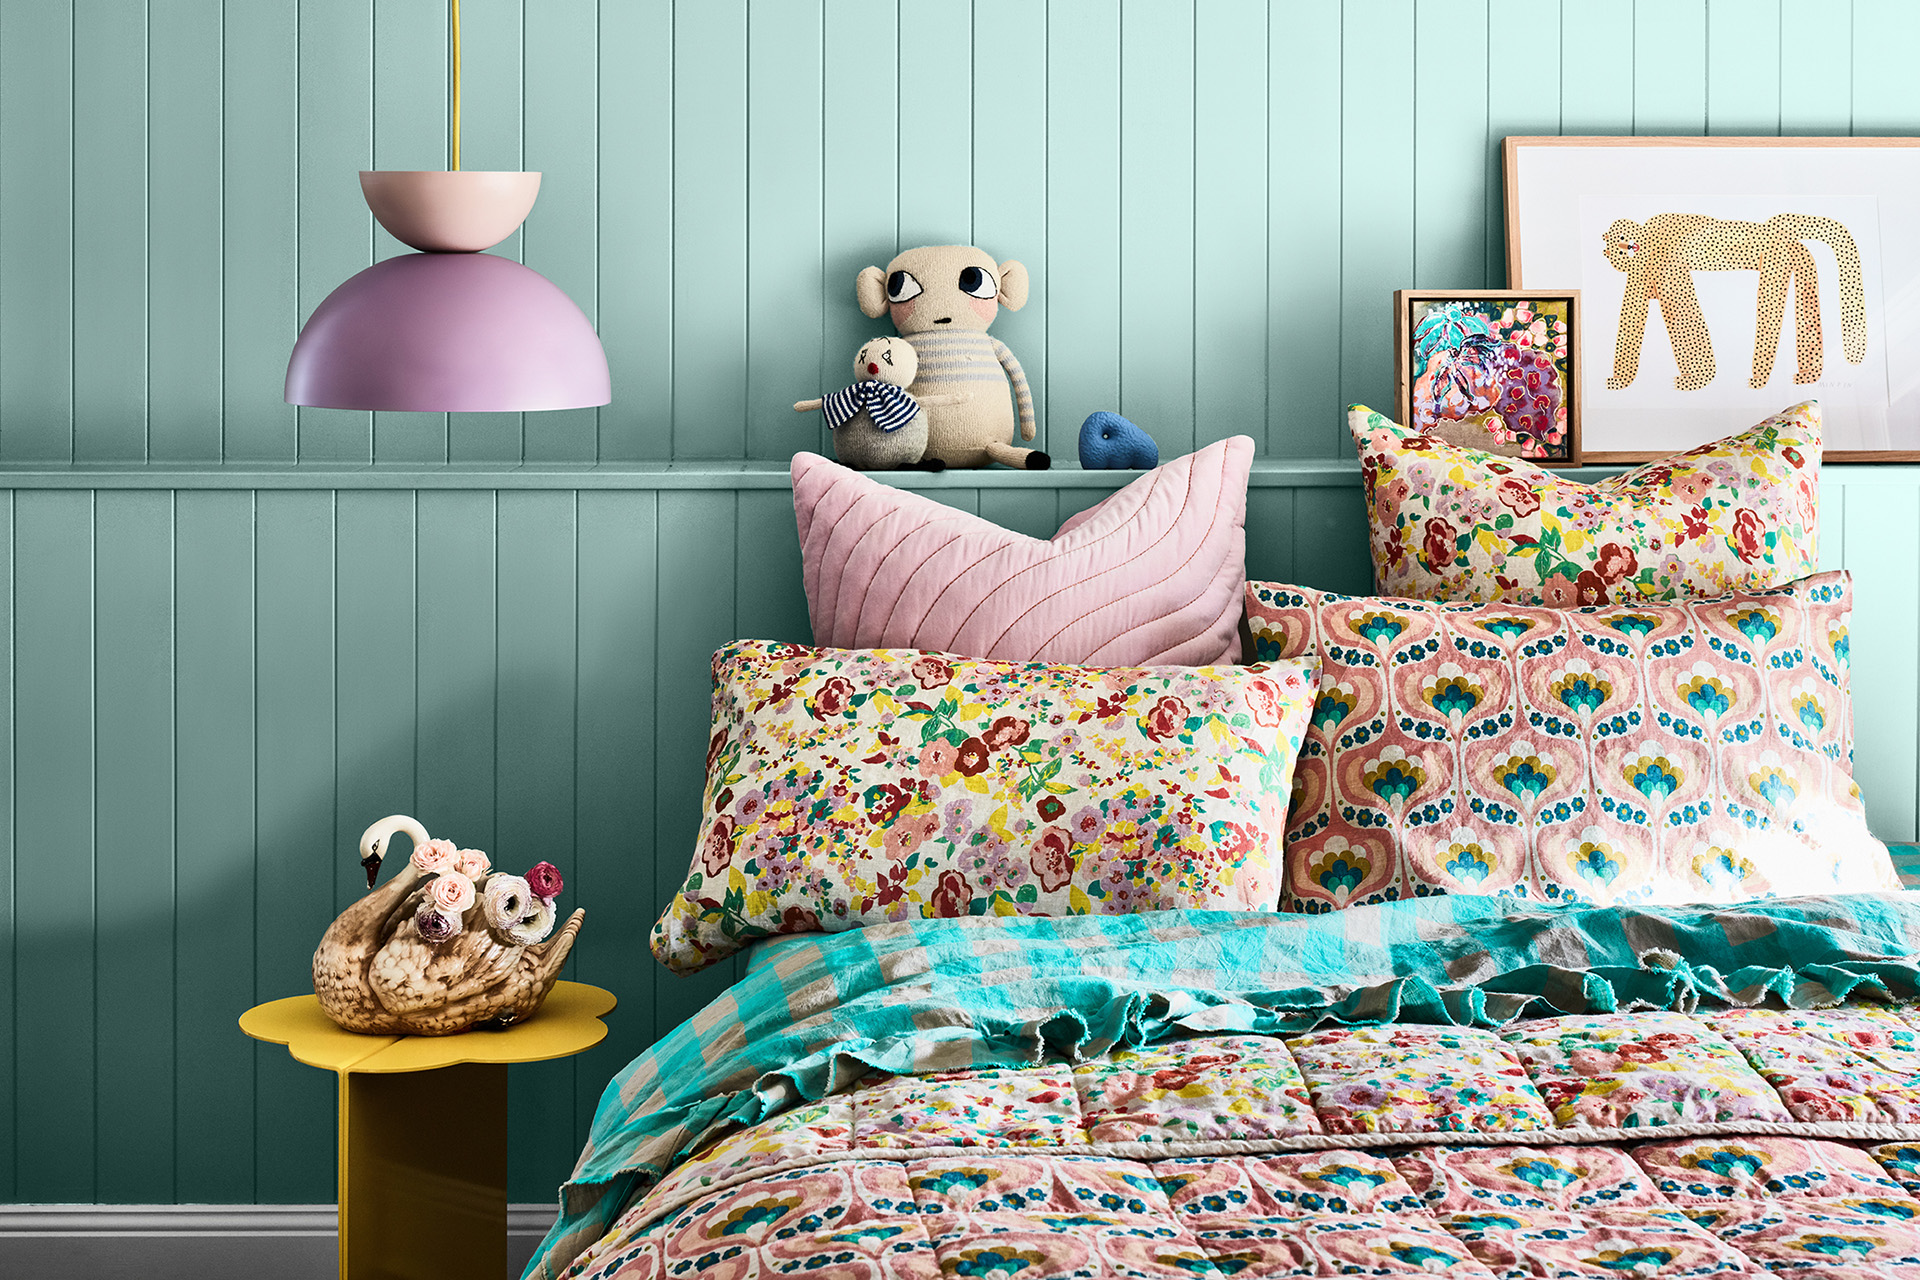 Give your child’s bedroom a fresh look with this colour palette